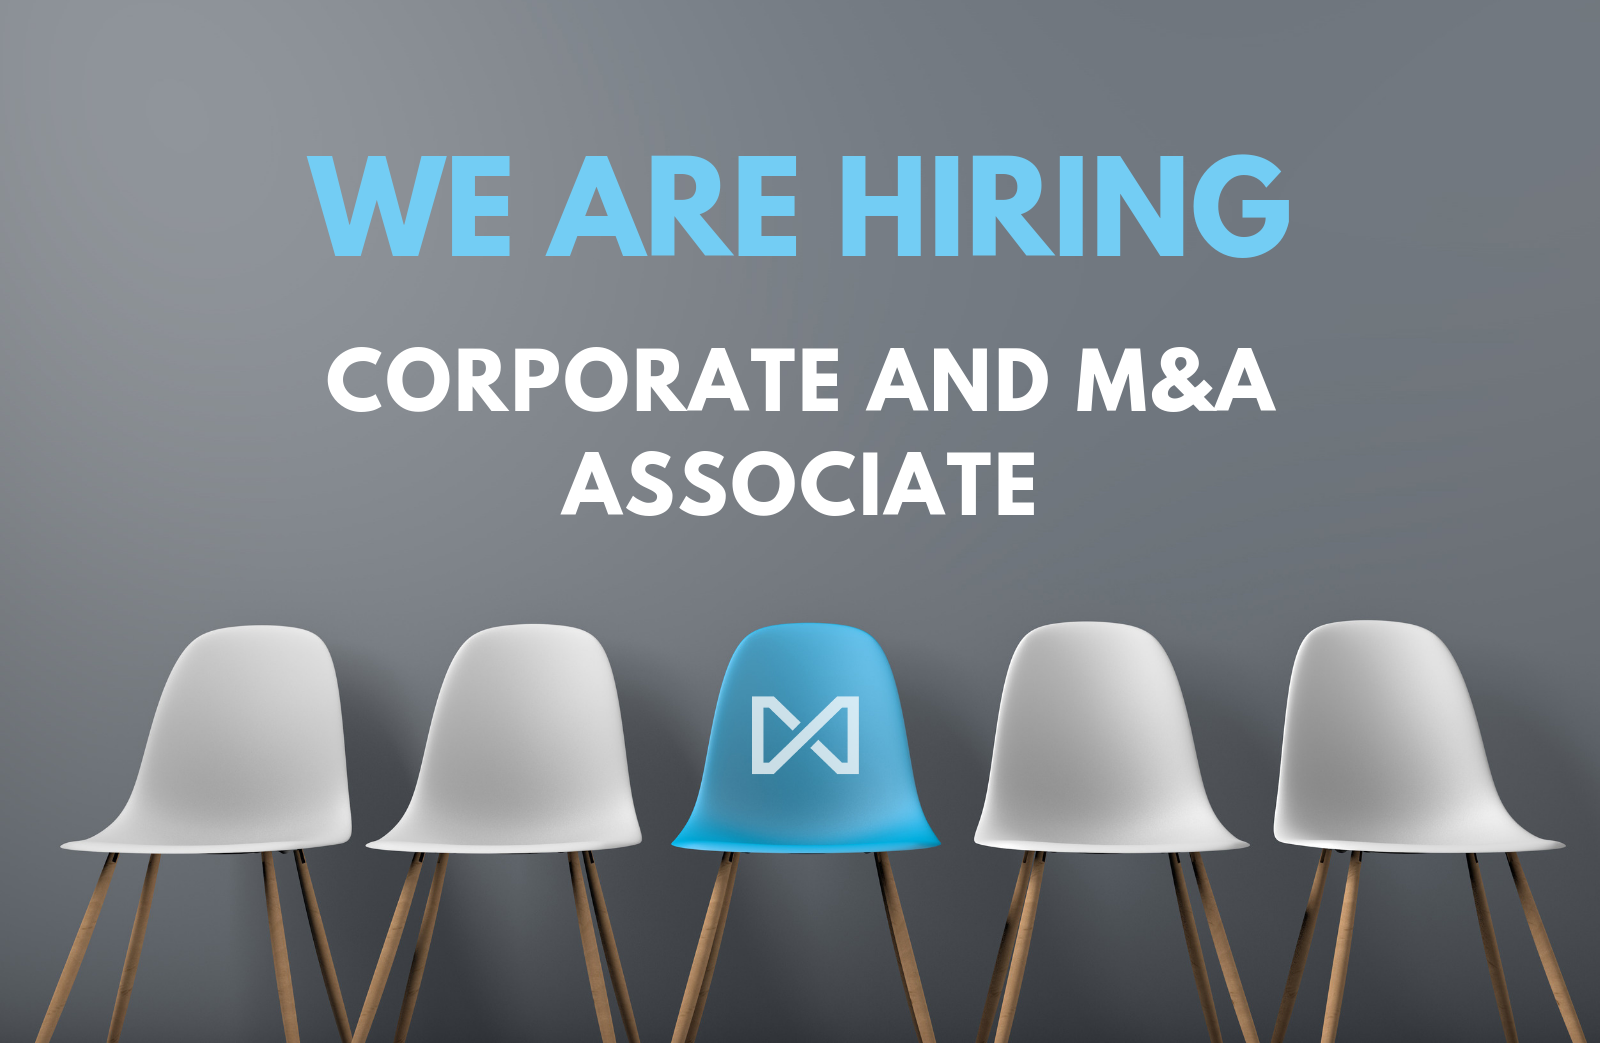 WANTED: Associate for Corporate and M&A practice